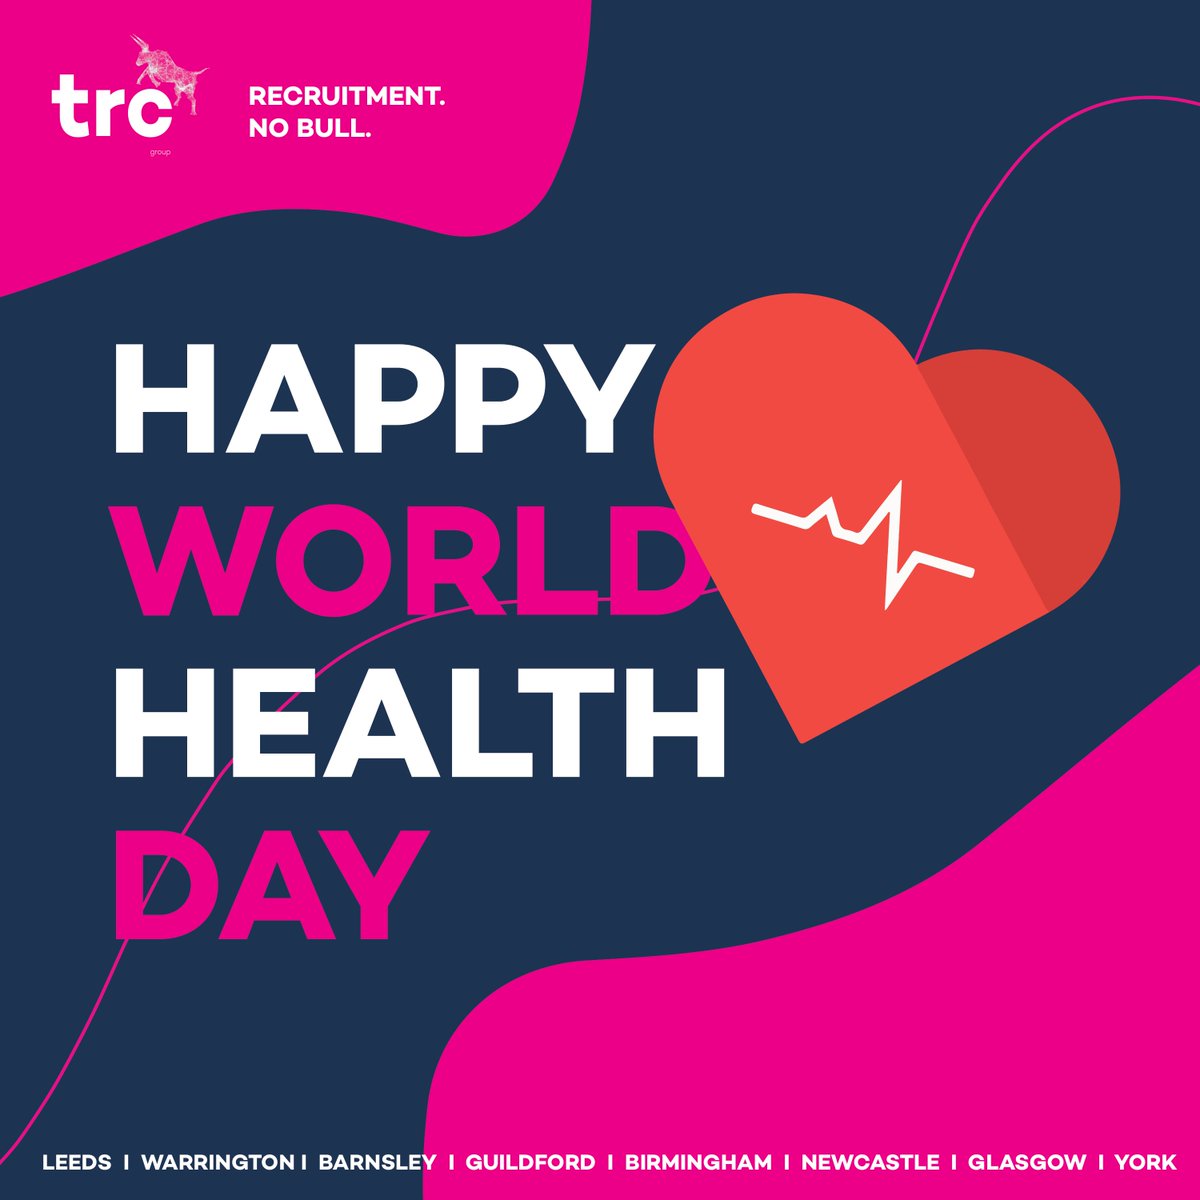 Let's join hands to prioritize our well-being and advocate for healthier lifestyles across the globe. Your health matters today, tomorrow, and always. 🌍💚 #therecruitmentcrowd #nobull #WorldHealthDay #HealthForAll